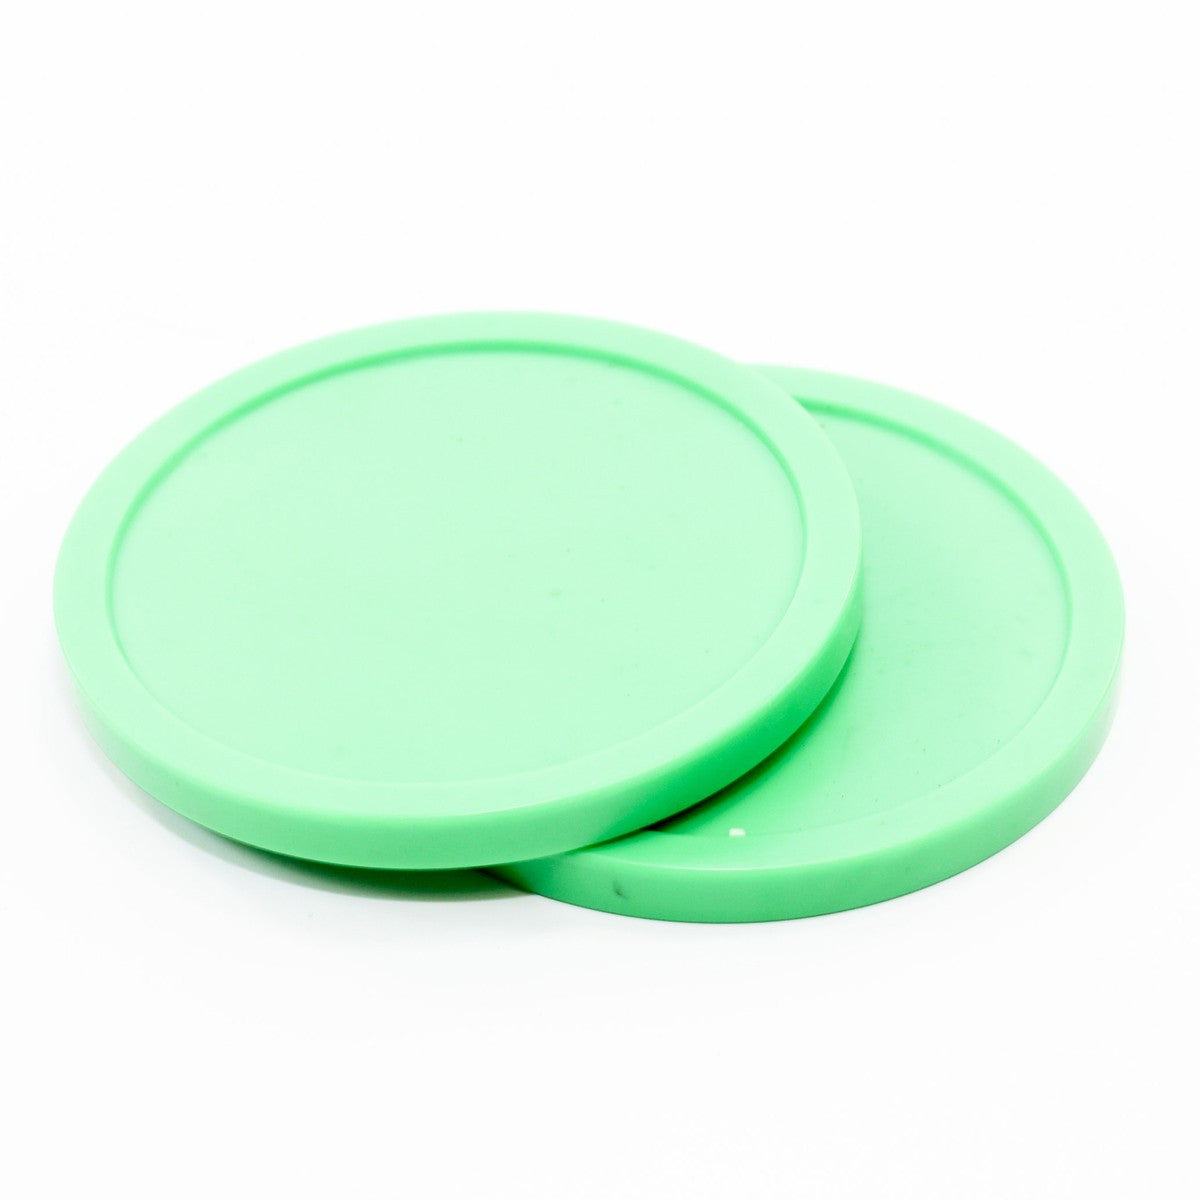 Picture of Imperial  Standard 3 1/4" Air Hockey Puck, Green (4-pack)